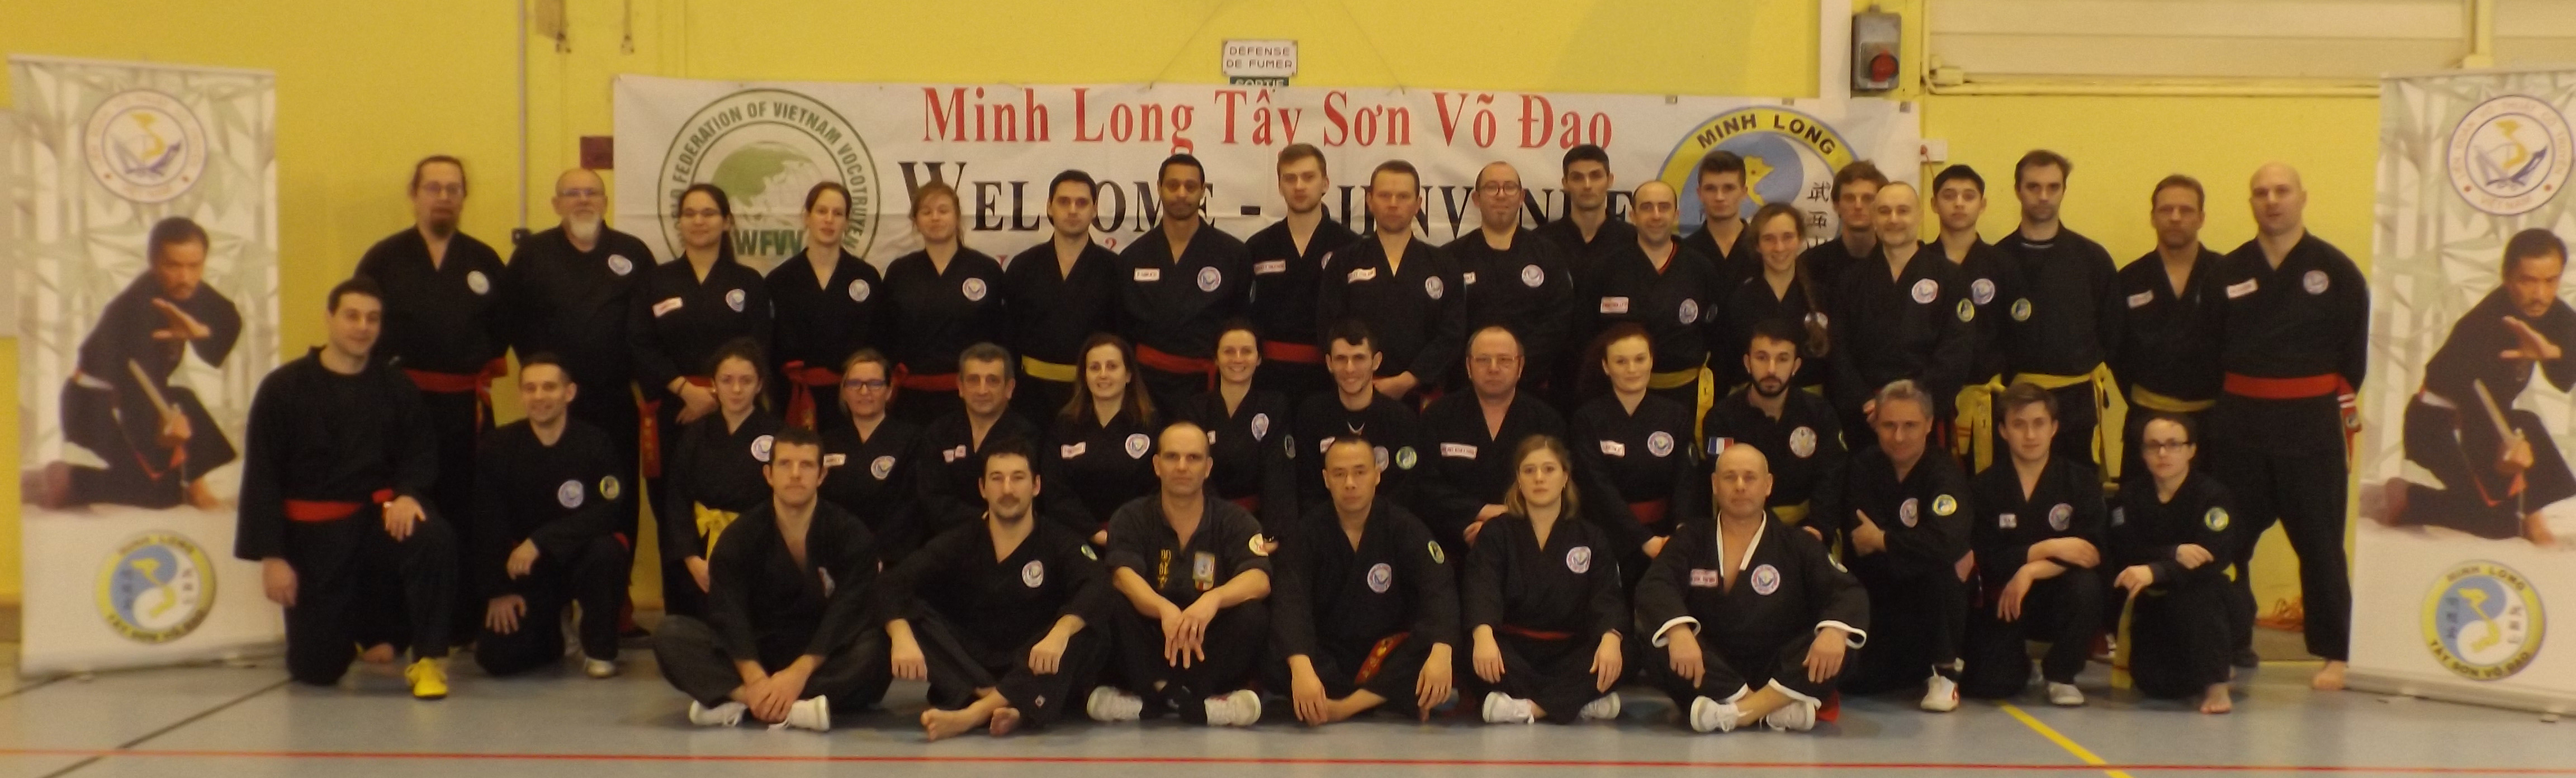 Photo groupe stage Minh Long Marolles